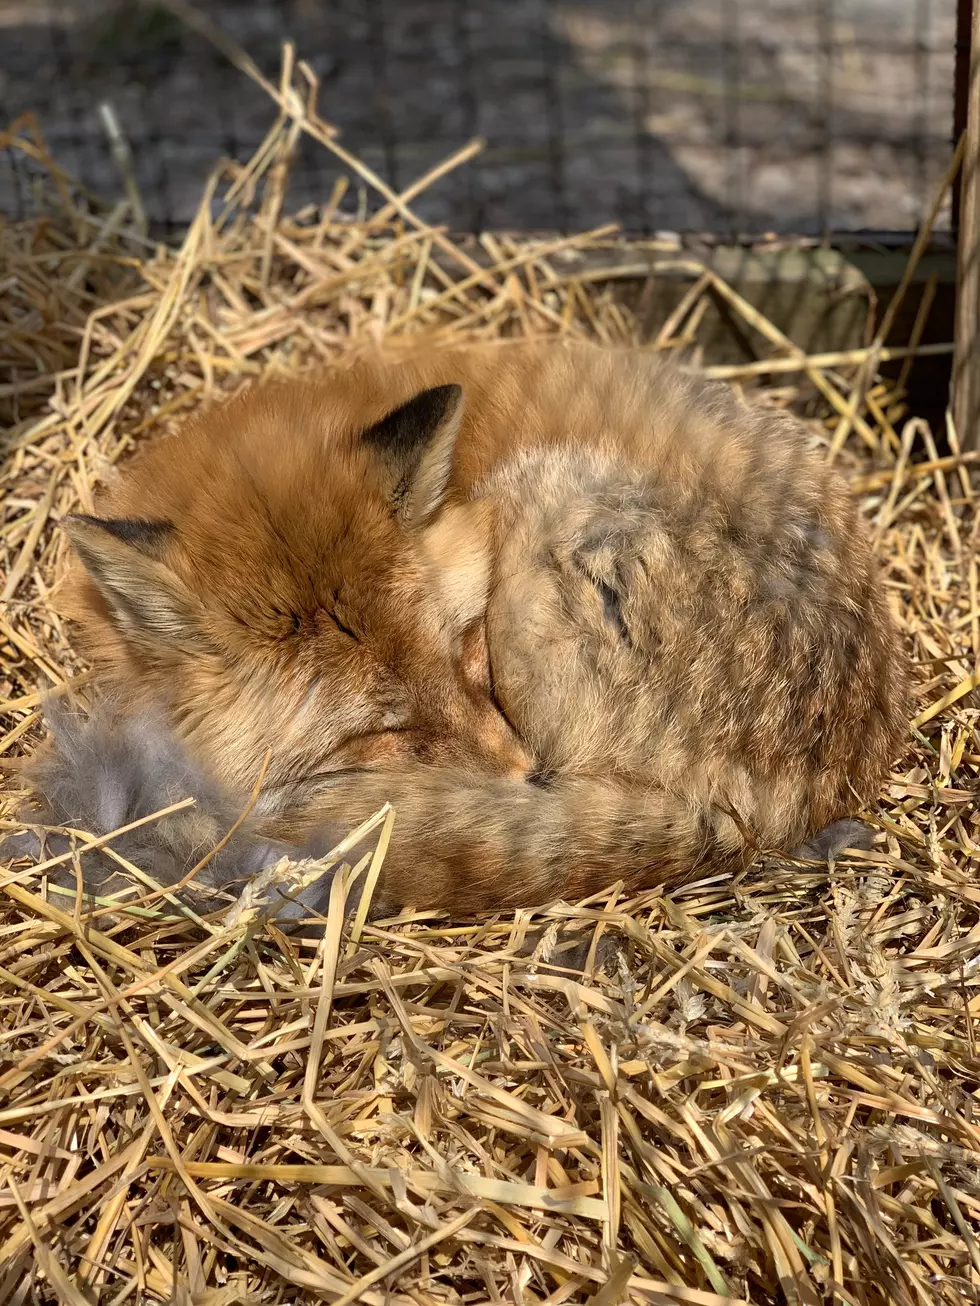 Utica Zoo Welcomes Newest Fuzzy Friend With Their Own Habitat